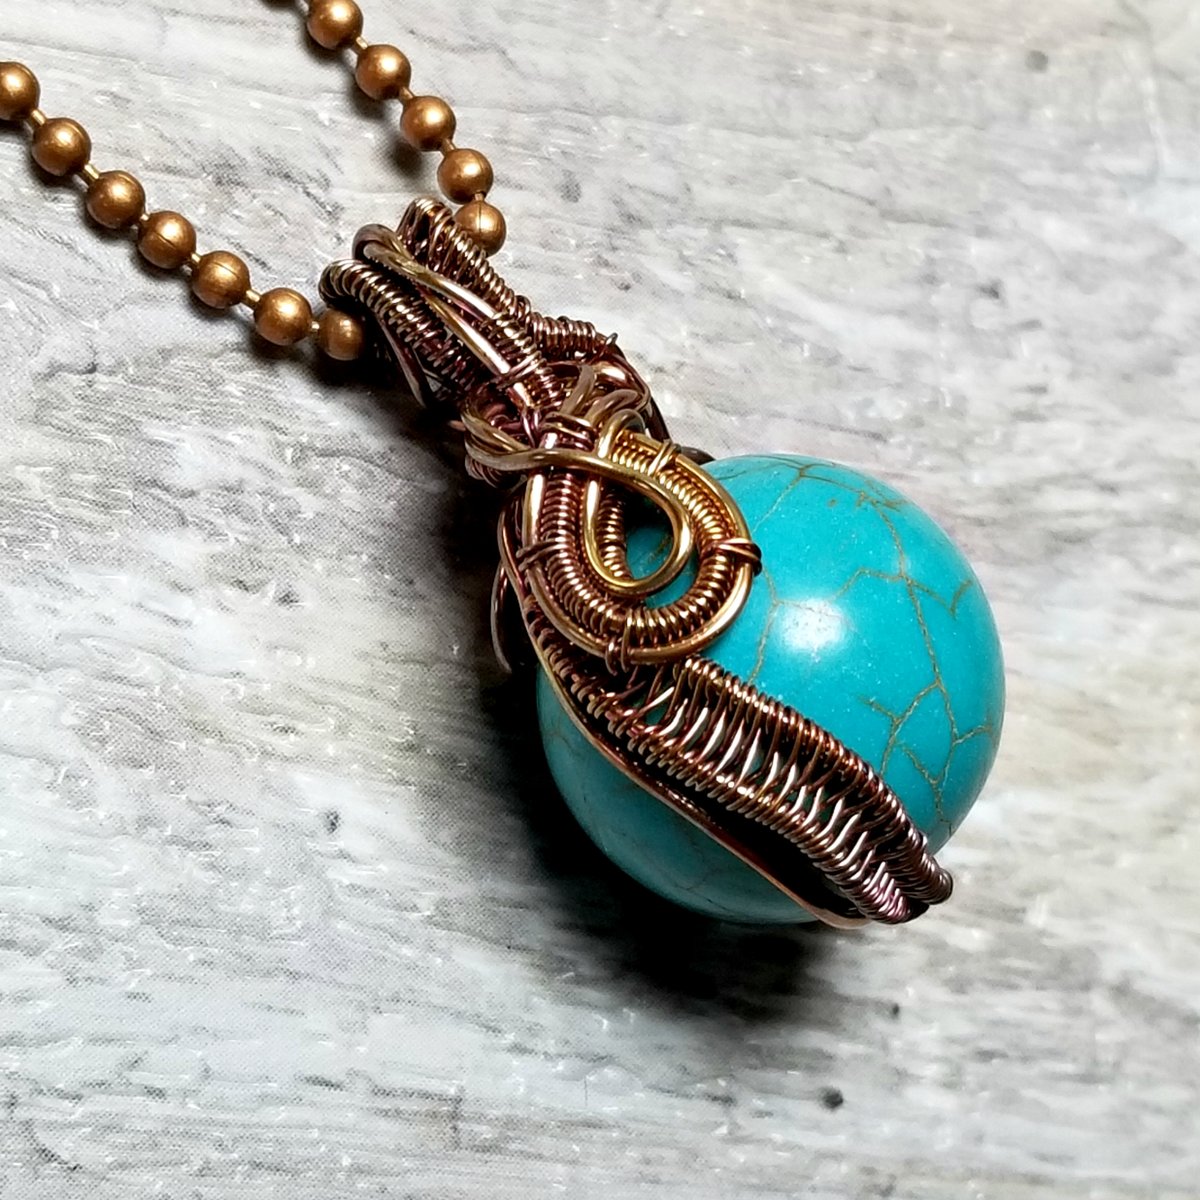 Blue Howlite Wire Wrapped Necklace, Copper Jewelry #wireweavejewelry #bluehowlitenecklace #bluenecklace #turquoisependant #theartisangroup

arkayscreations.com/product/blue-h…